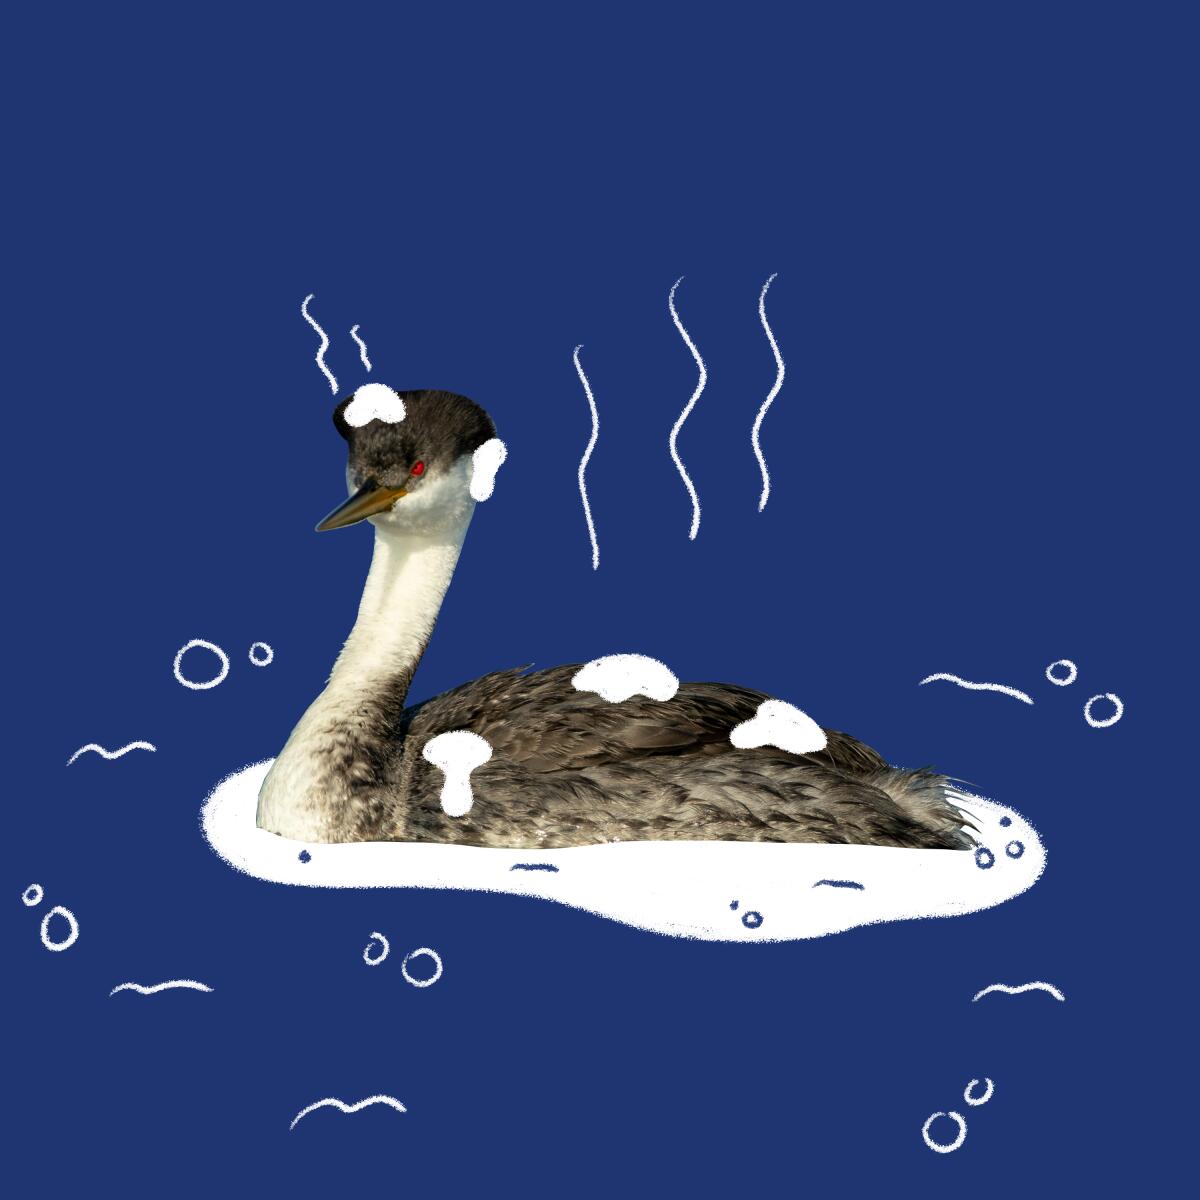 Western grebe, in a photo illustration.